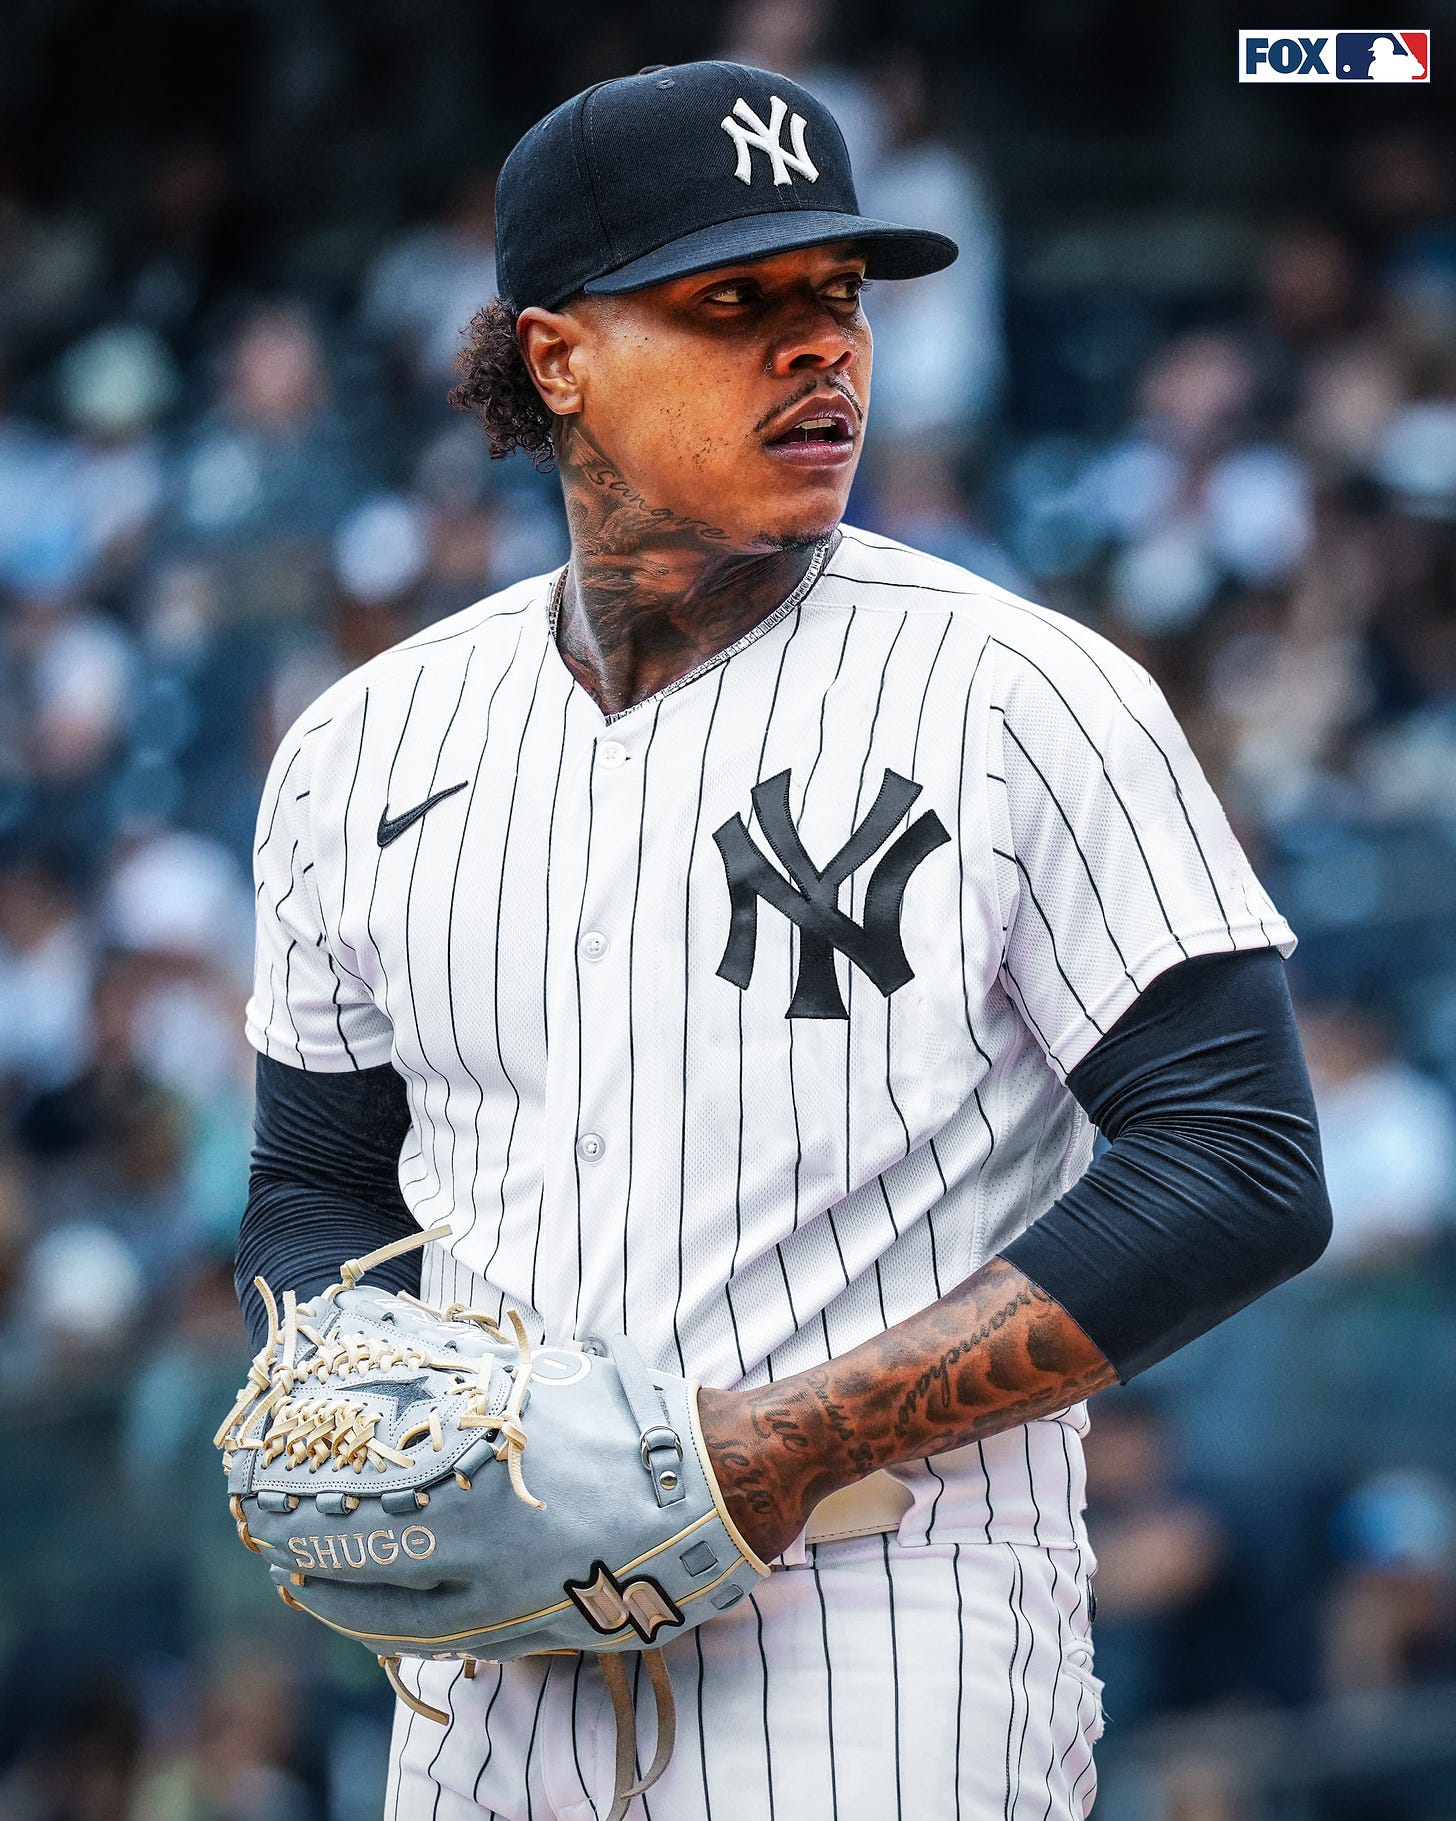 FOX Sports: MLB on X: "The Yankees and Marcus Stroman are in agreement on a  deal, per multiple reports https://t.co/FYRMw40wa6" / X